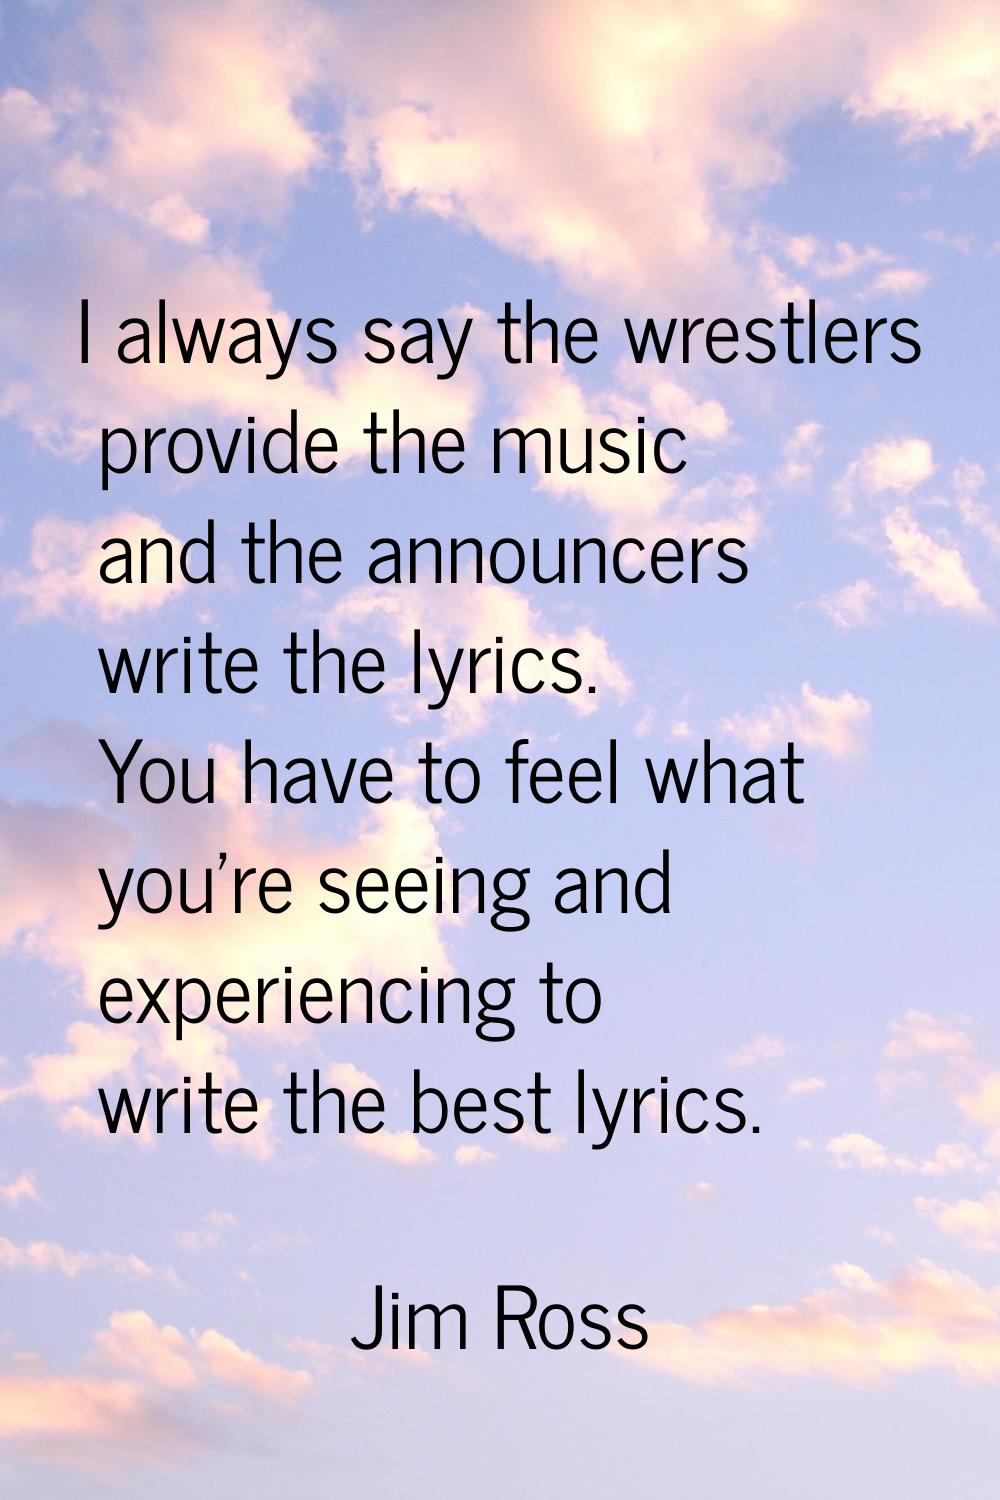 I always say the wrestlers provide the music and the announcers write the lyrics. You have to feel 